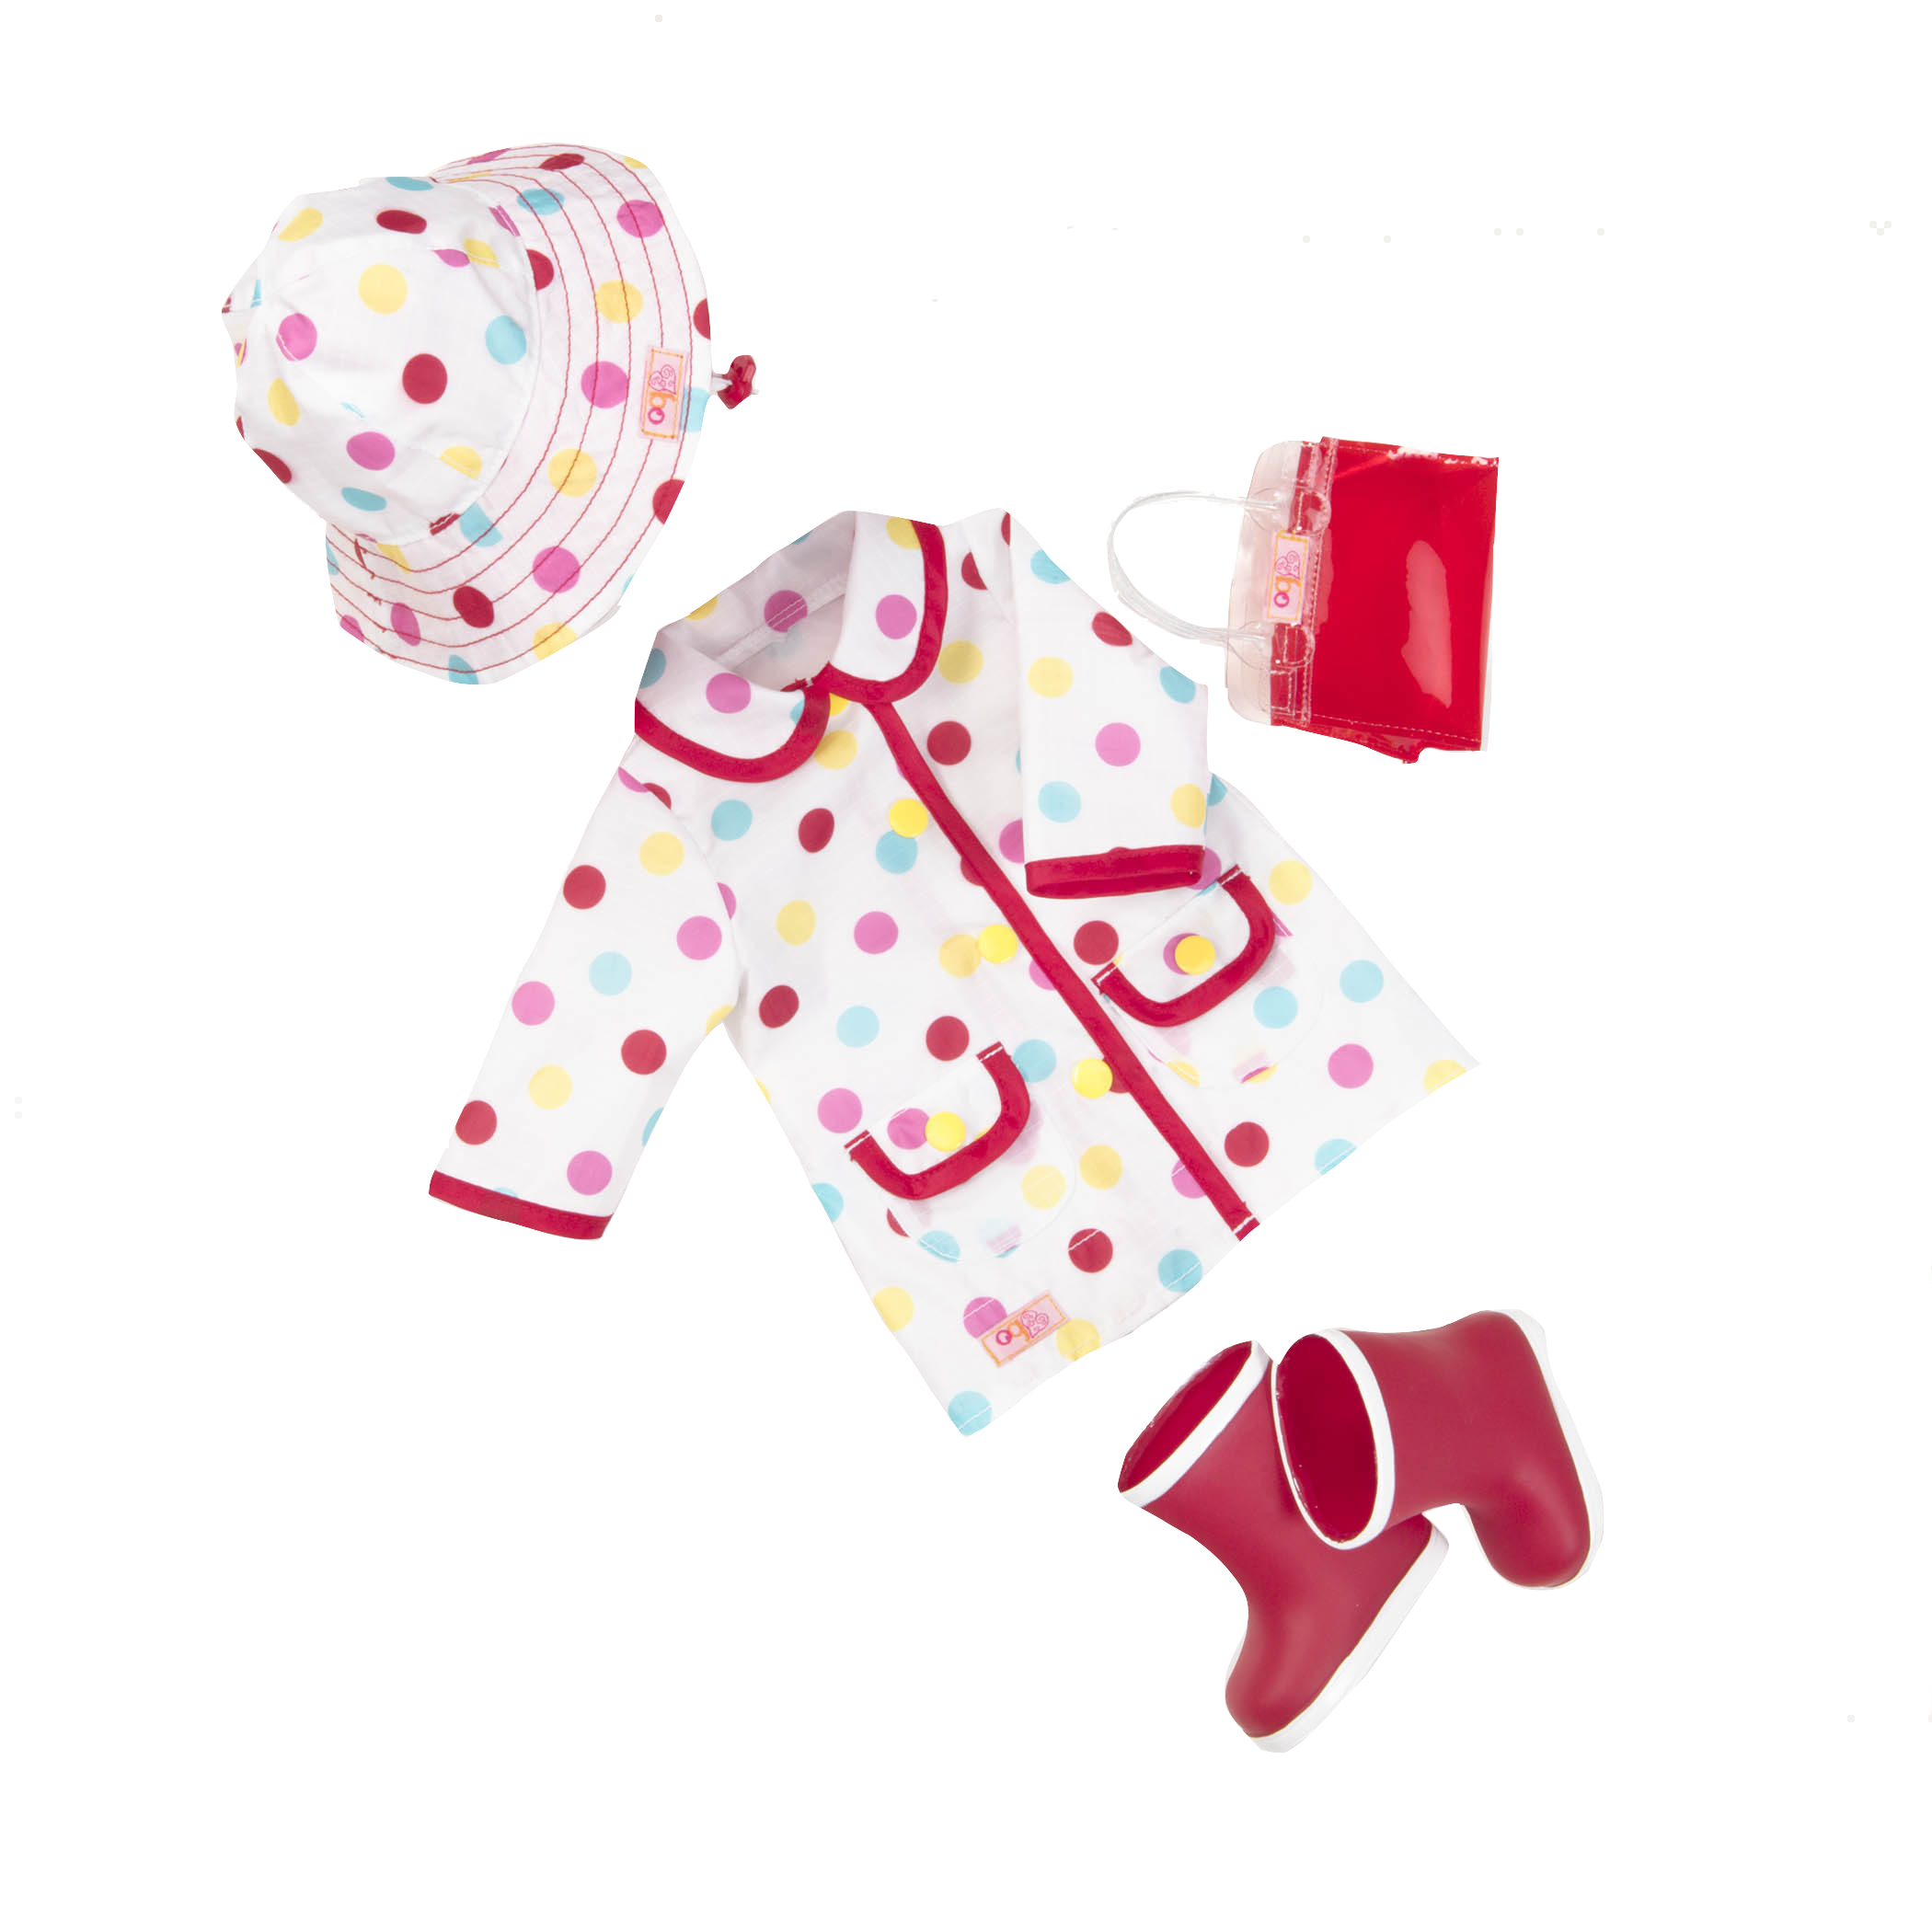 A Spot of Rain 18-inch Doll Raincoat Outfit